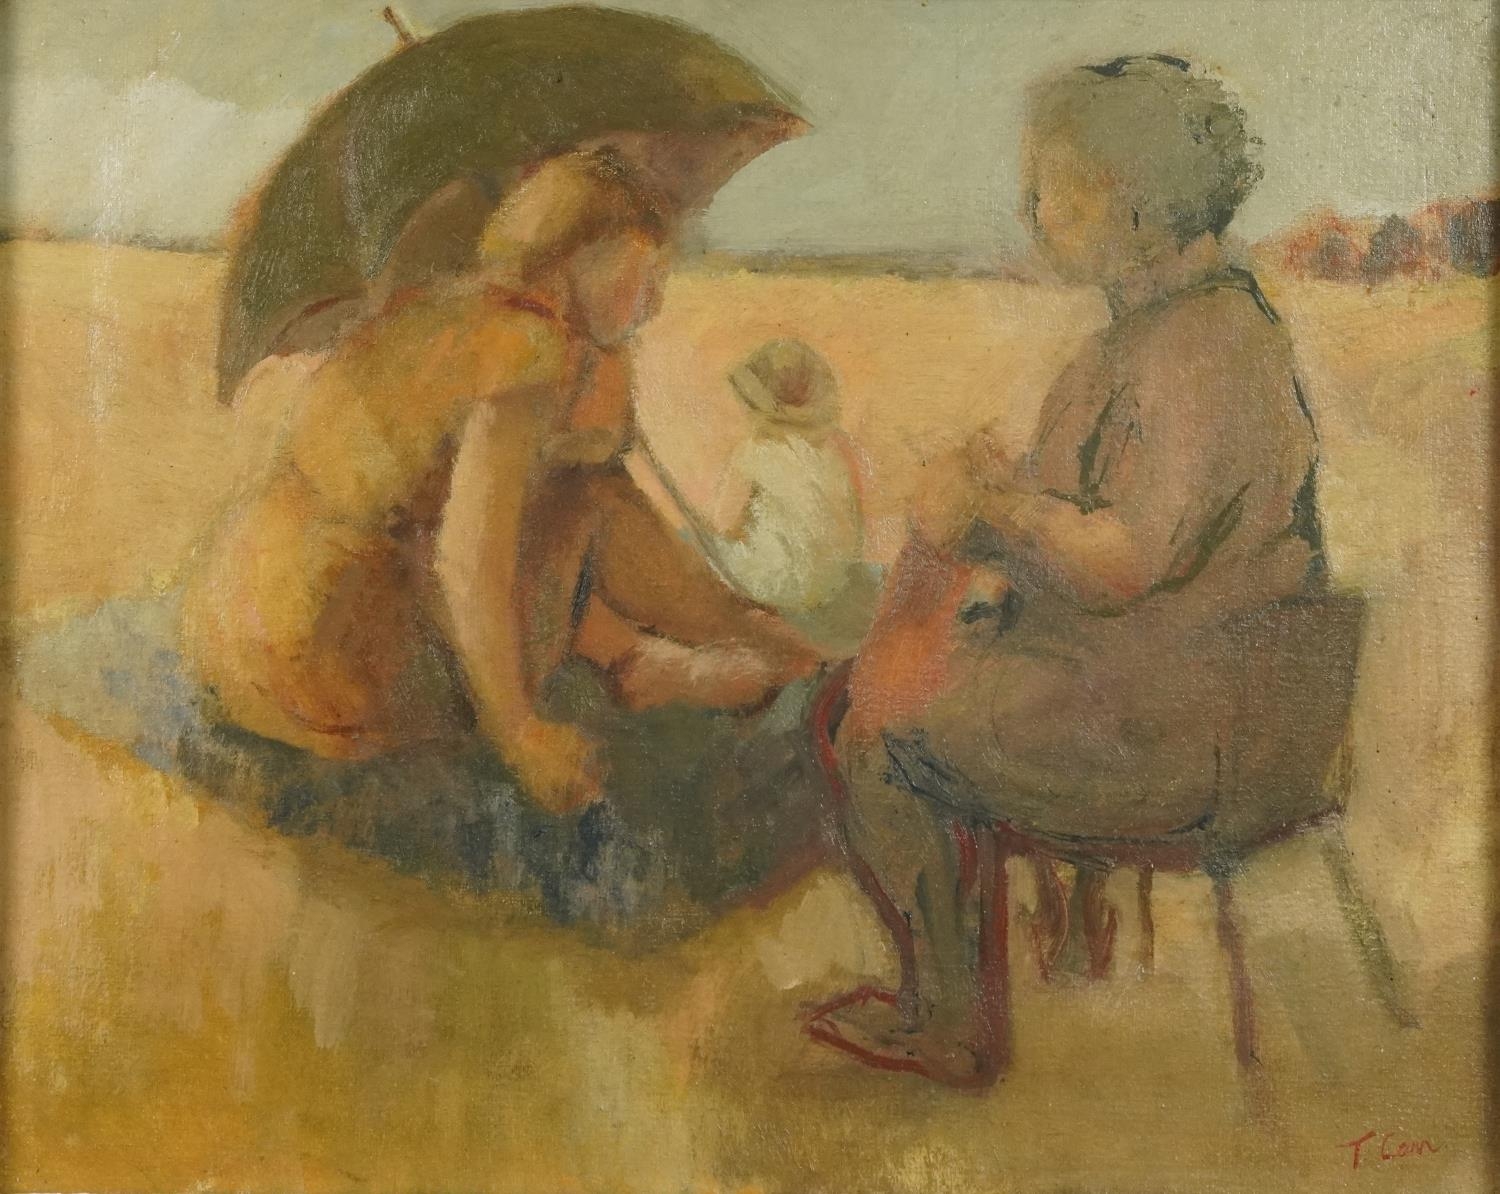 Beach scene with mother and child, post war British oil on canvas, mounted and framed, 50cm x 39cm